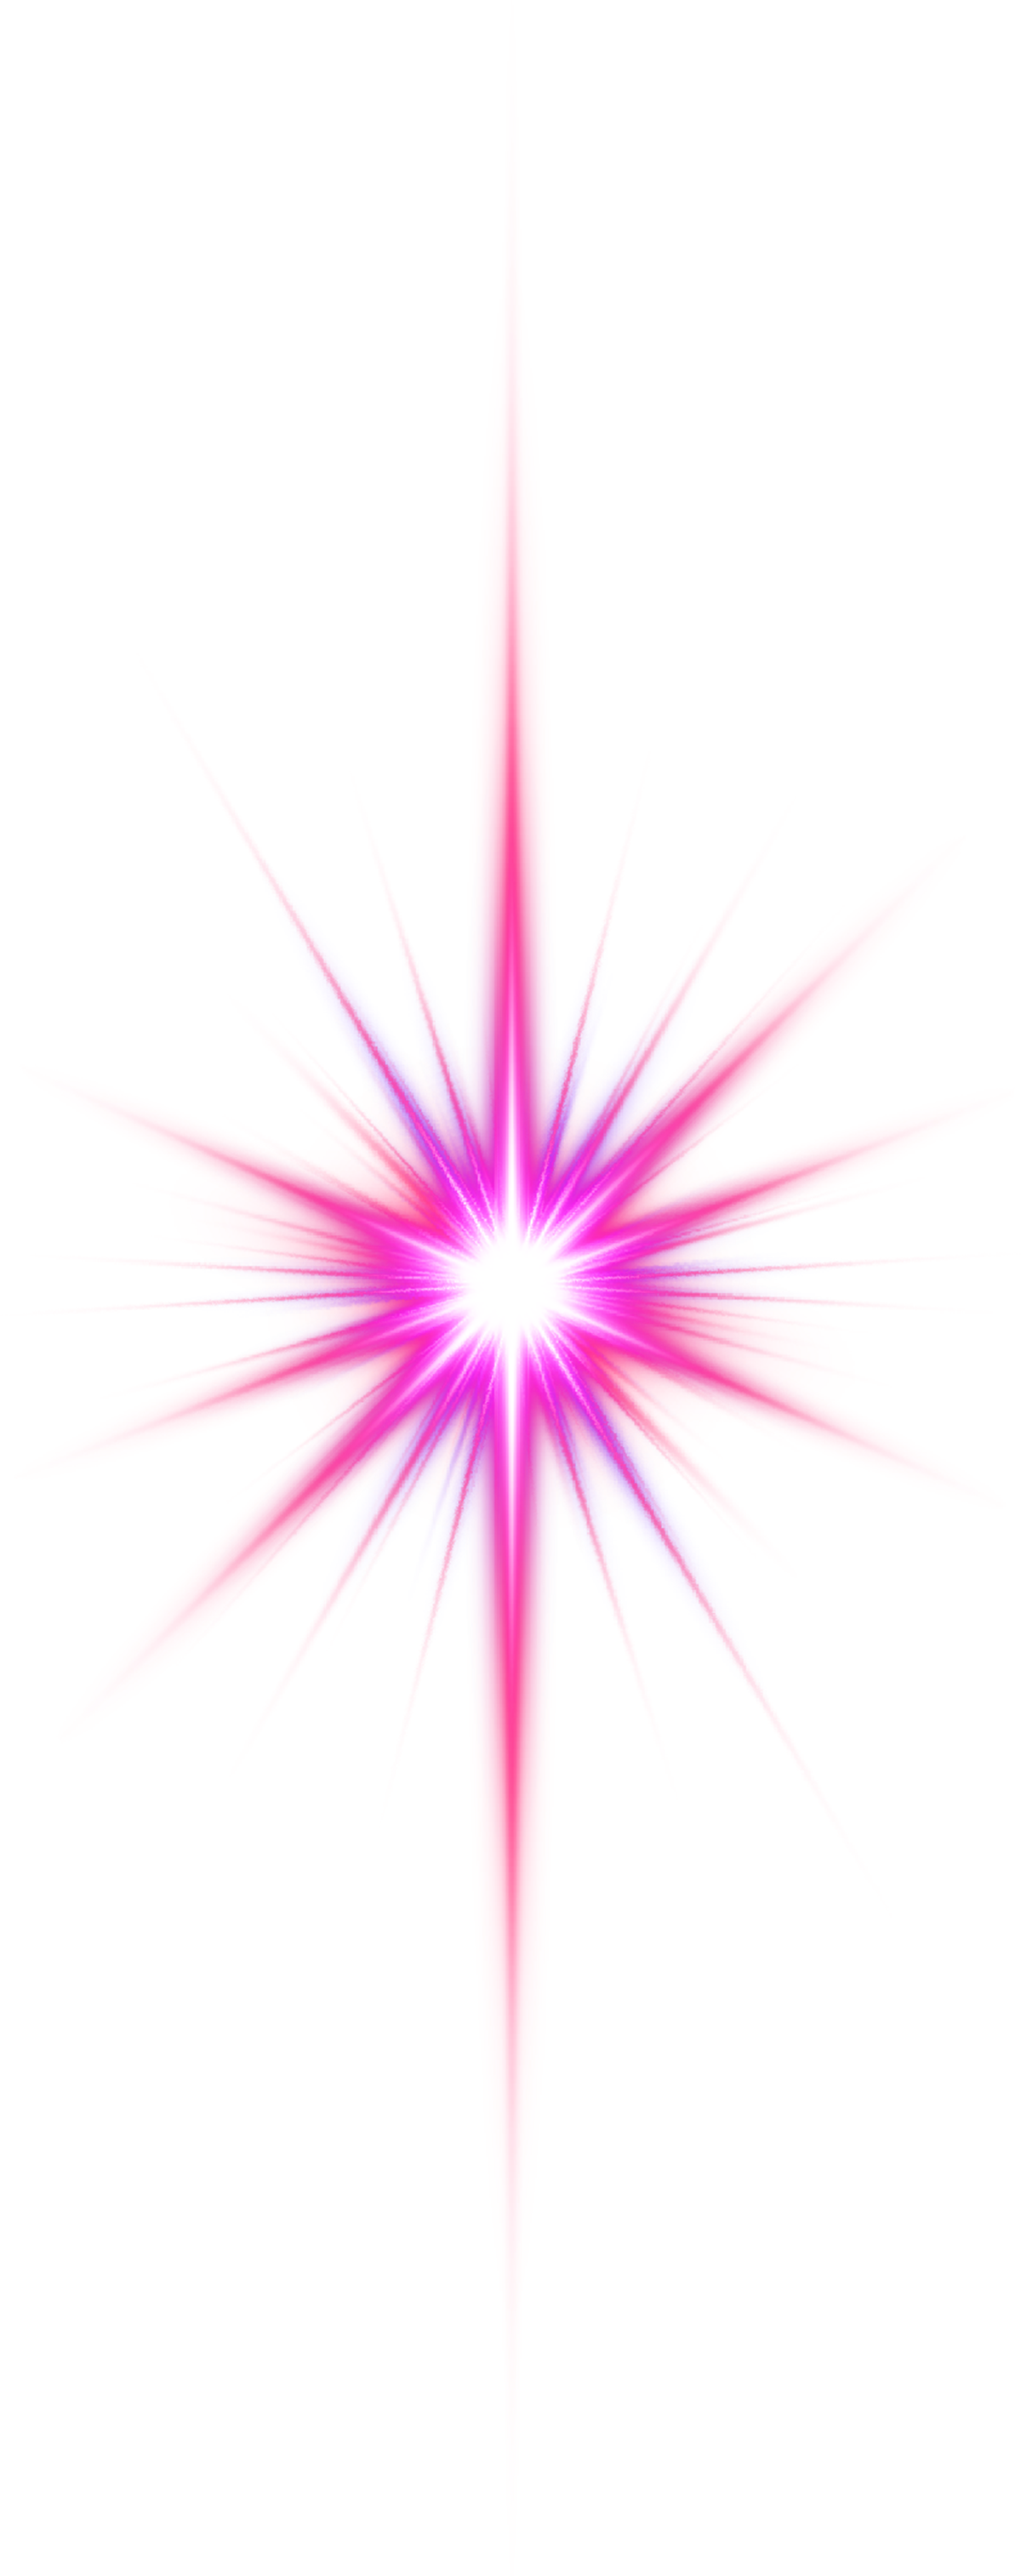 Light Flare PNG Free Image - PNG All | PNG All